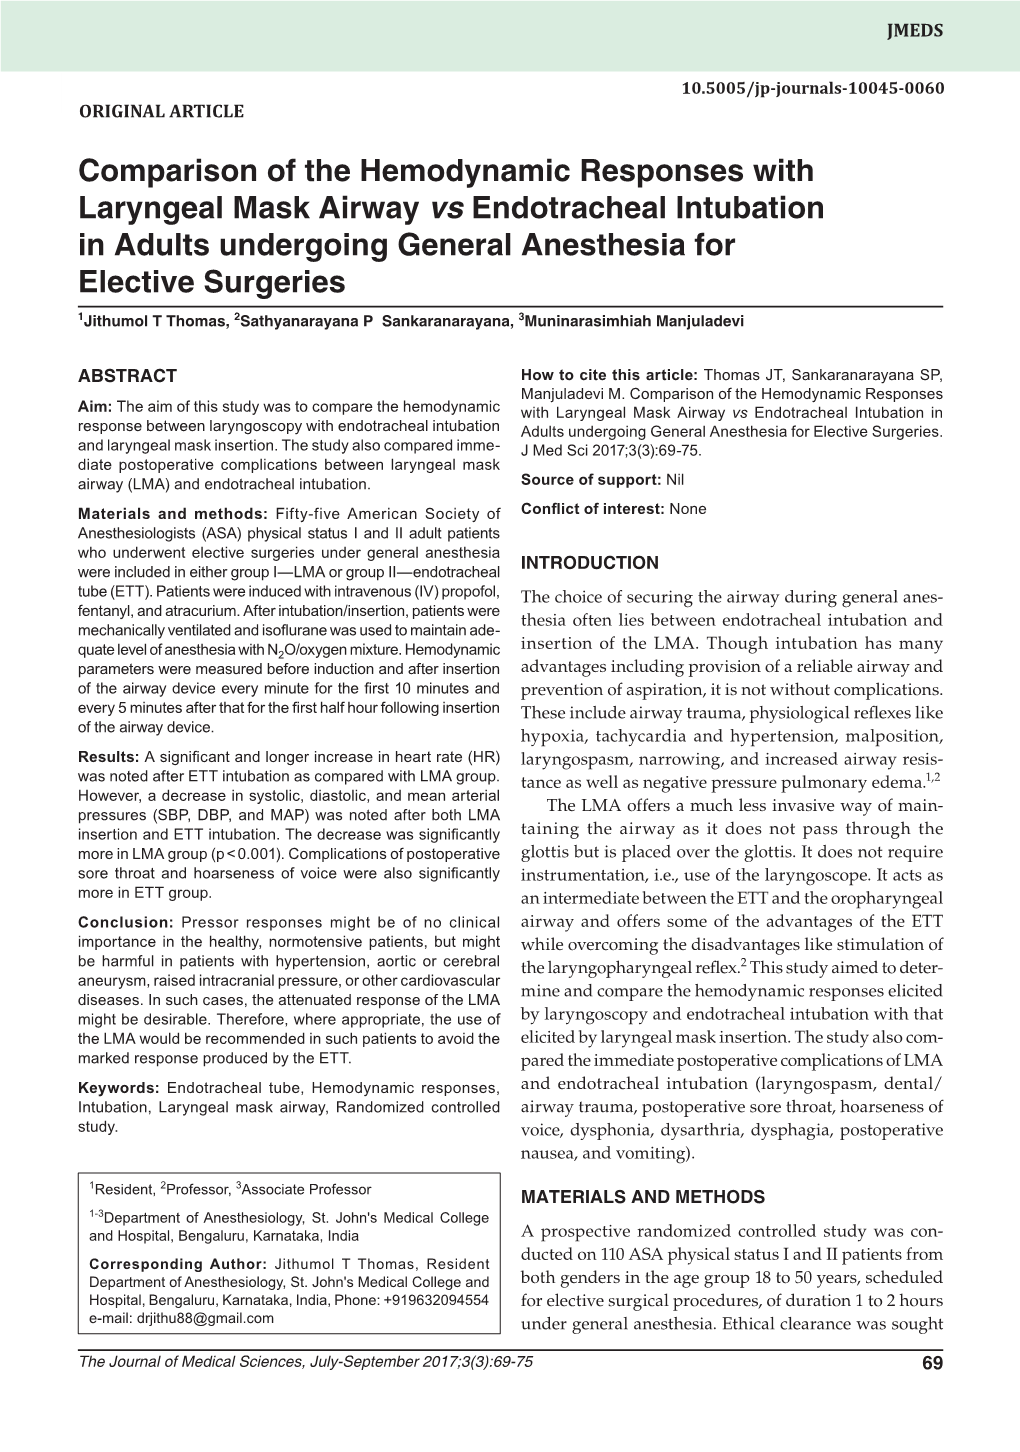 Comparison of the Hemodynamic Responses with Laryngeal Mask Airway Vs Endotracheal Intubation in Adults Undergoing General Anes